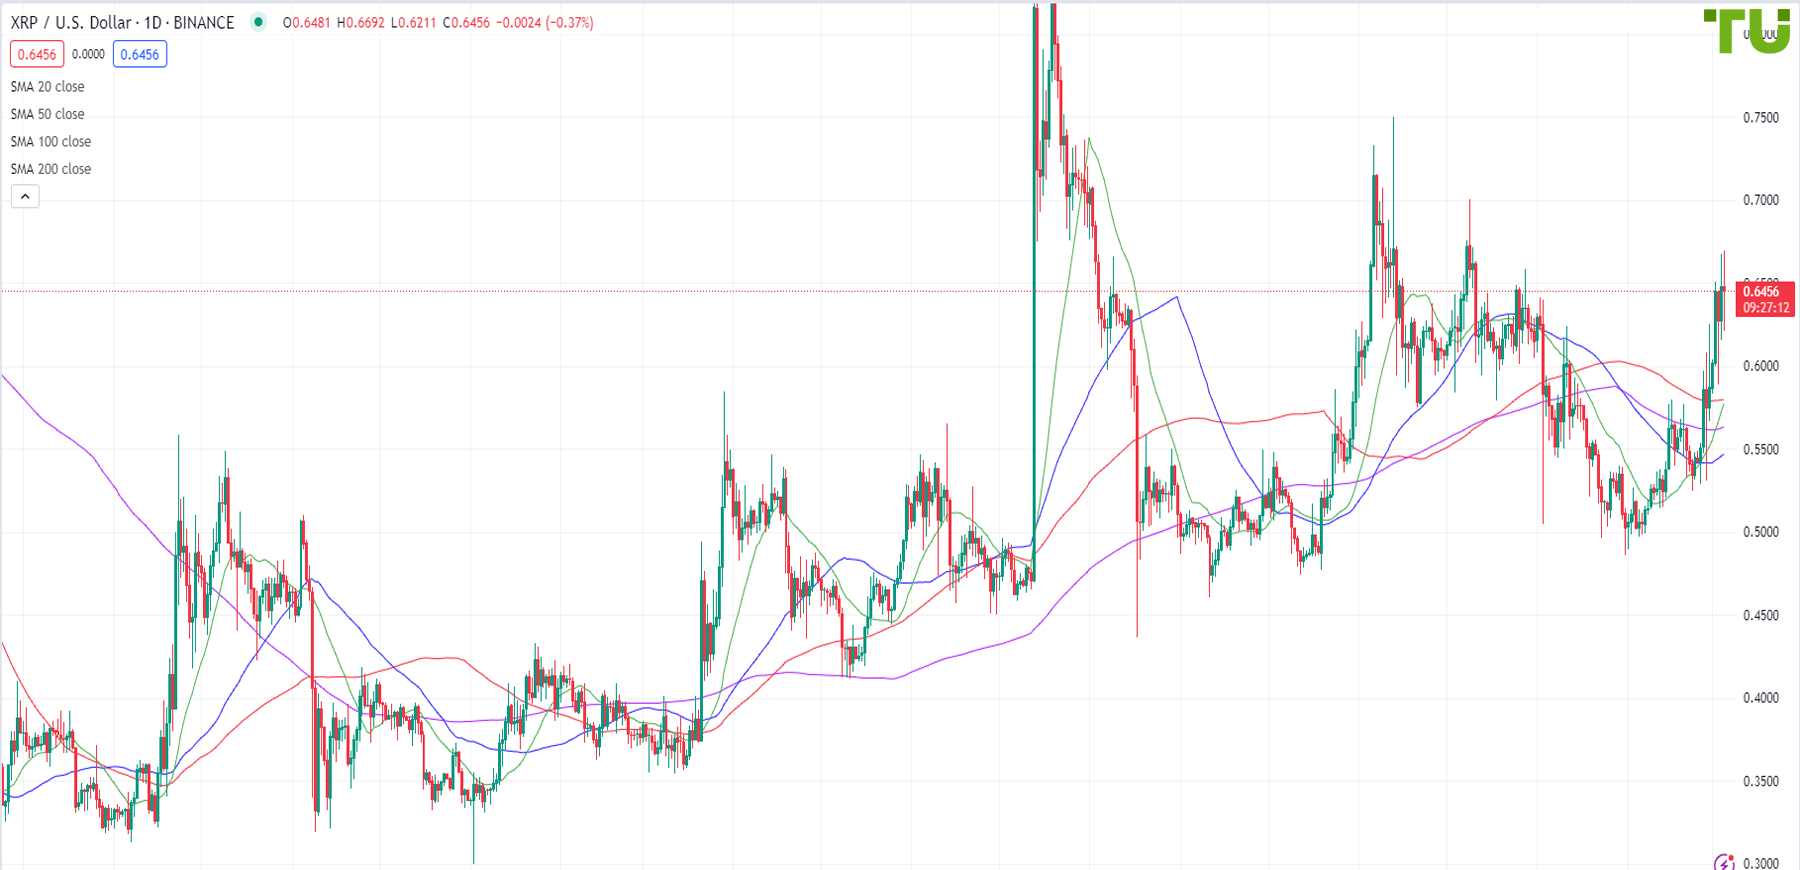 XRP/USD is trying to break through the resistance of 0.6692